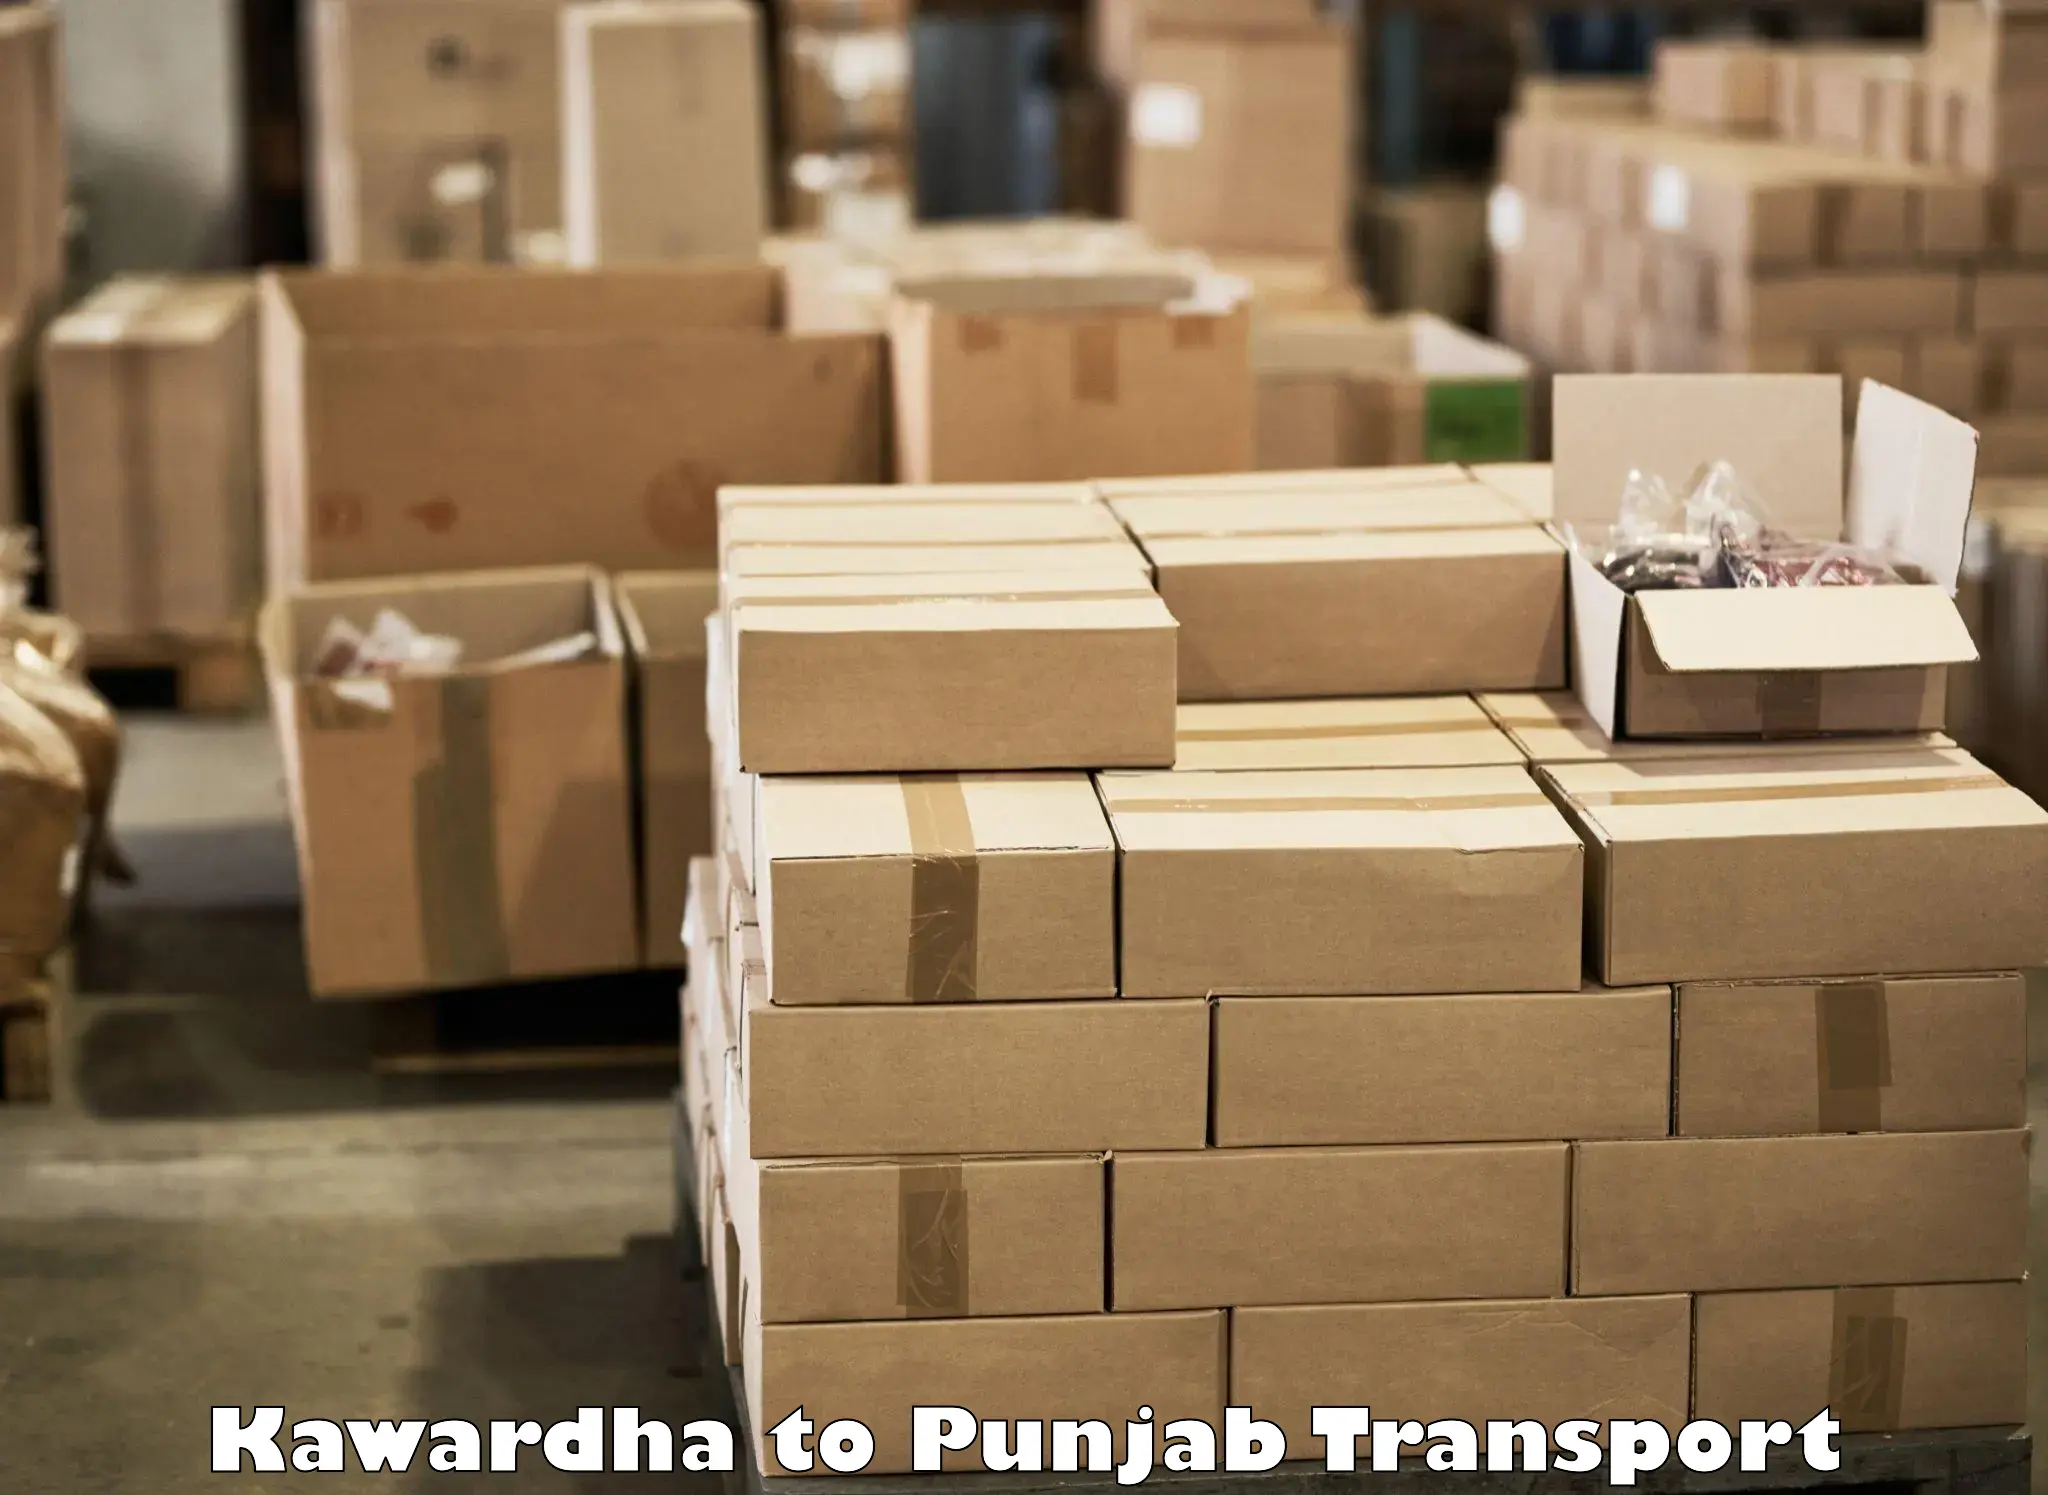 Transport shared services in Kawardha to IIT Ropar